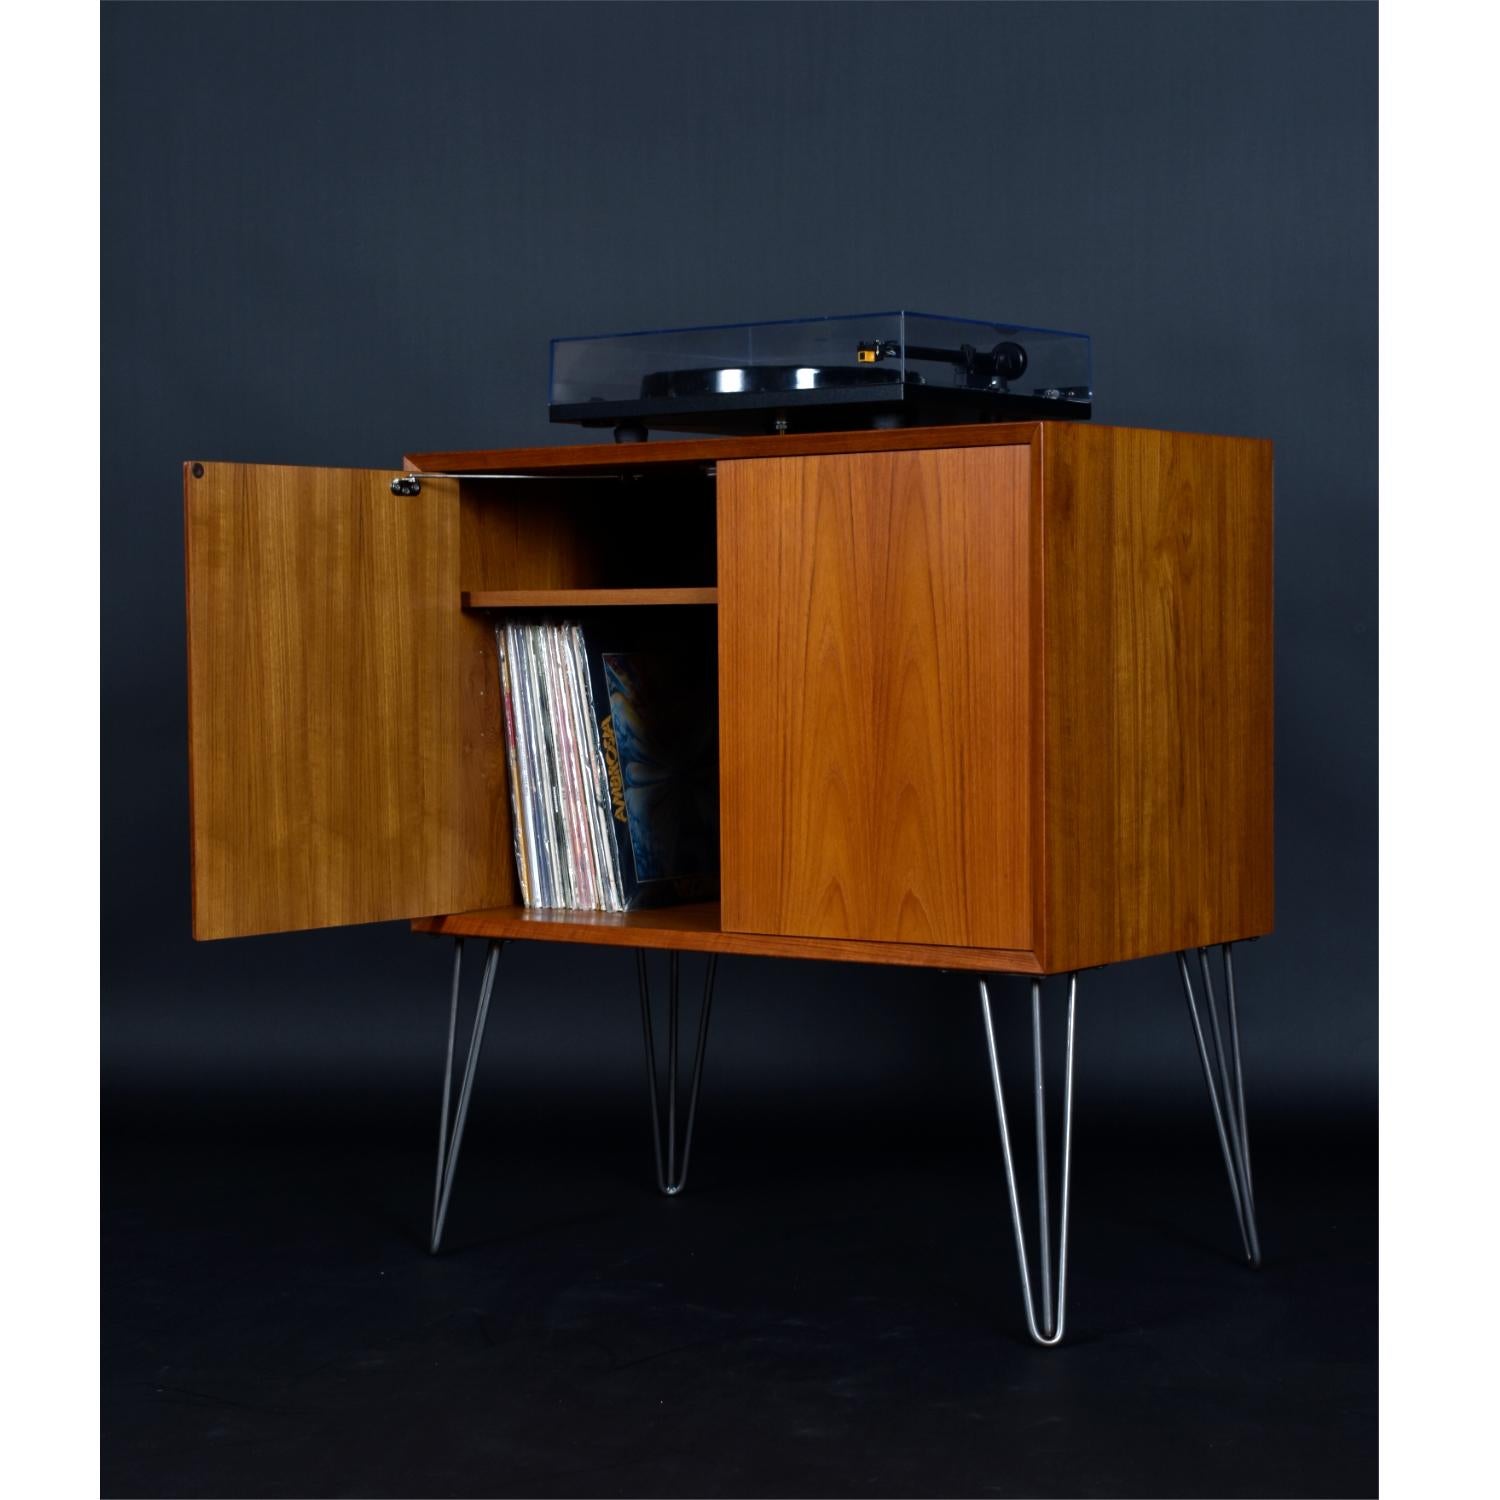 Our shop elevated (literally) this Cado cabinet with a sleek set of 14